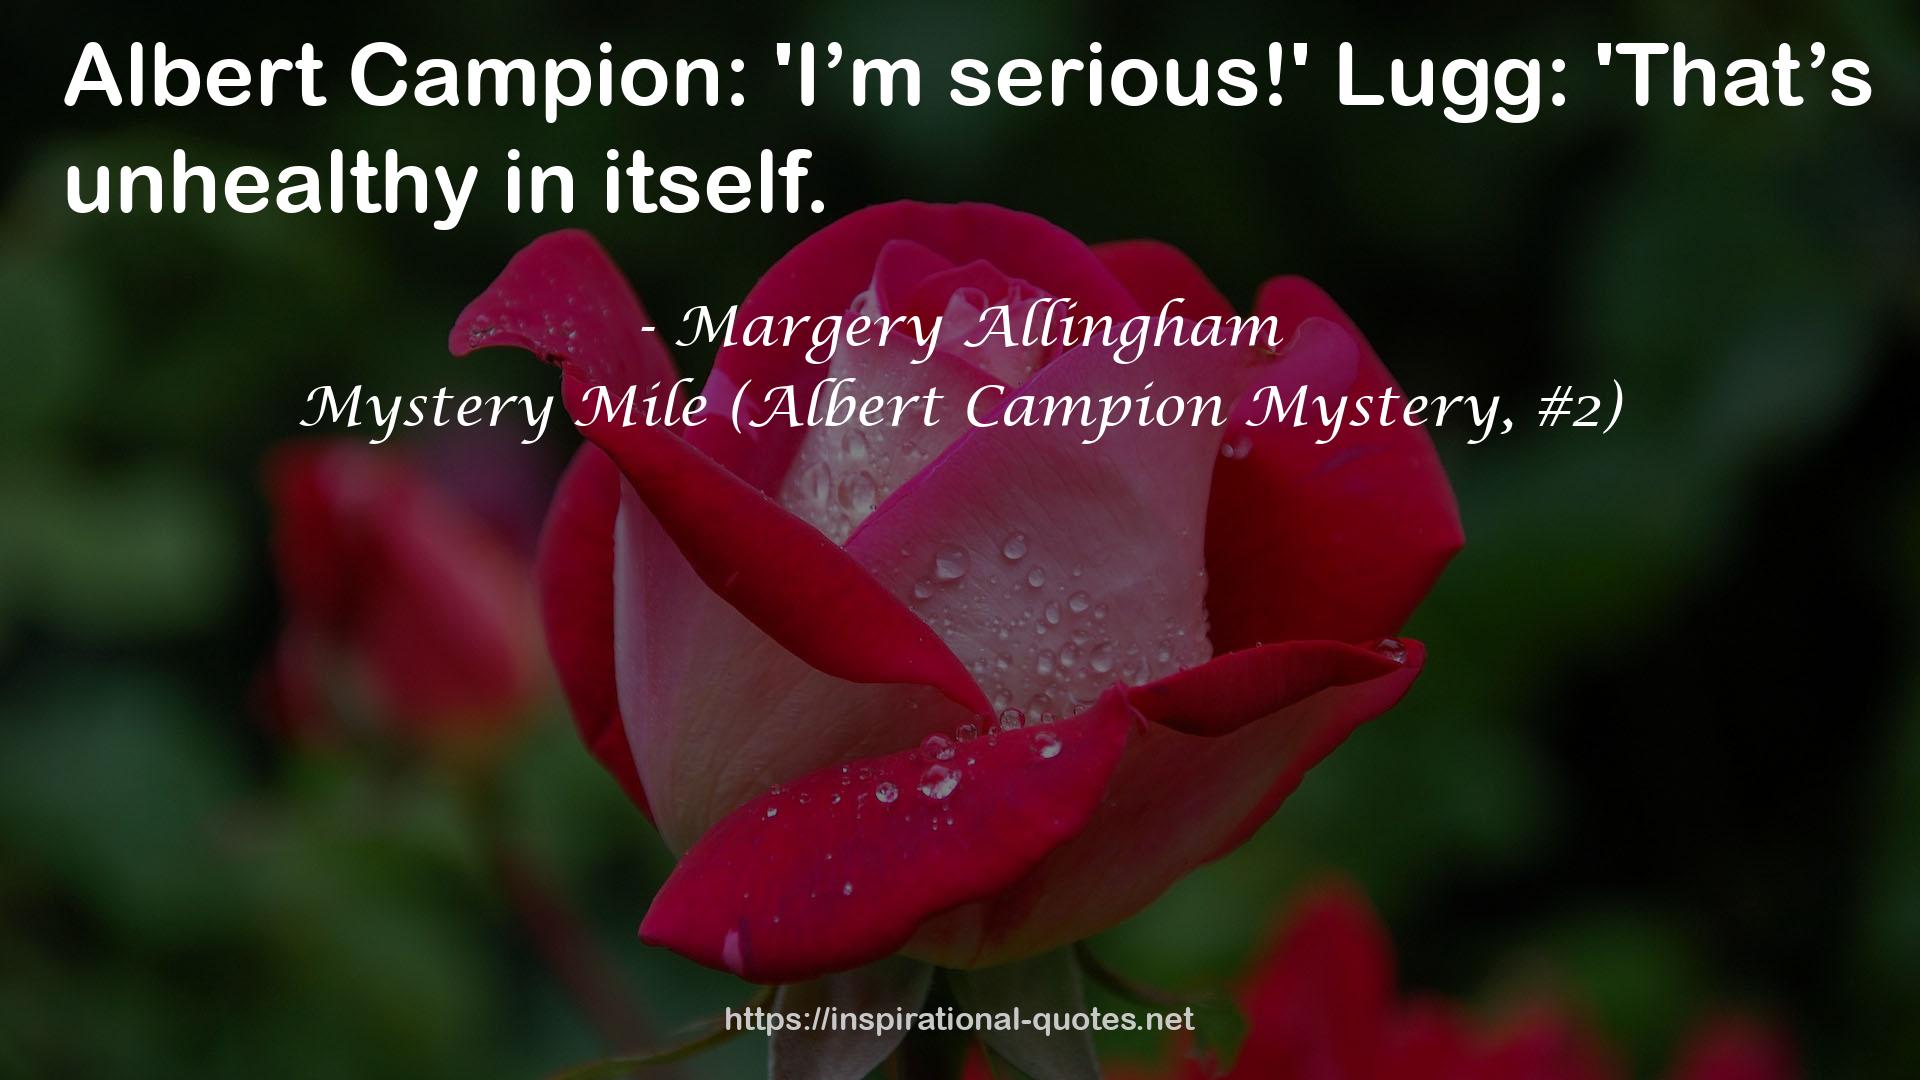 Mystery Mile (Albert Campion Mystery, #2) QUOTES